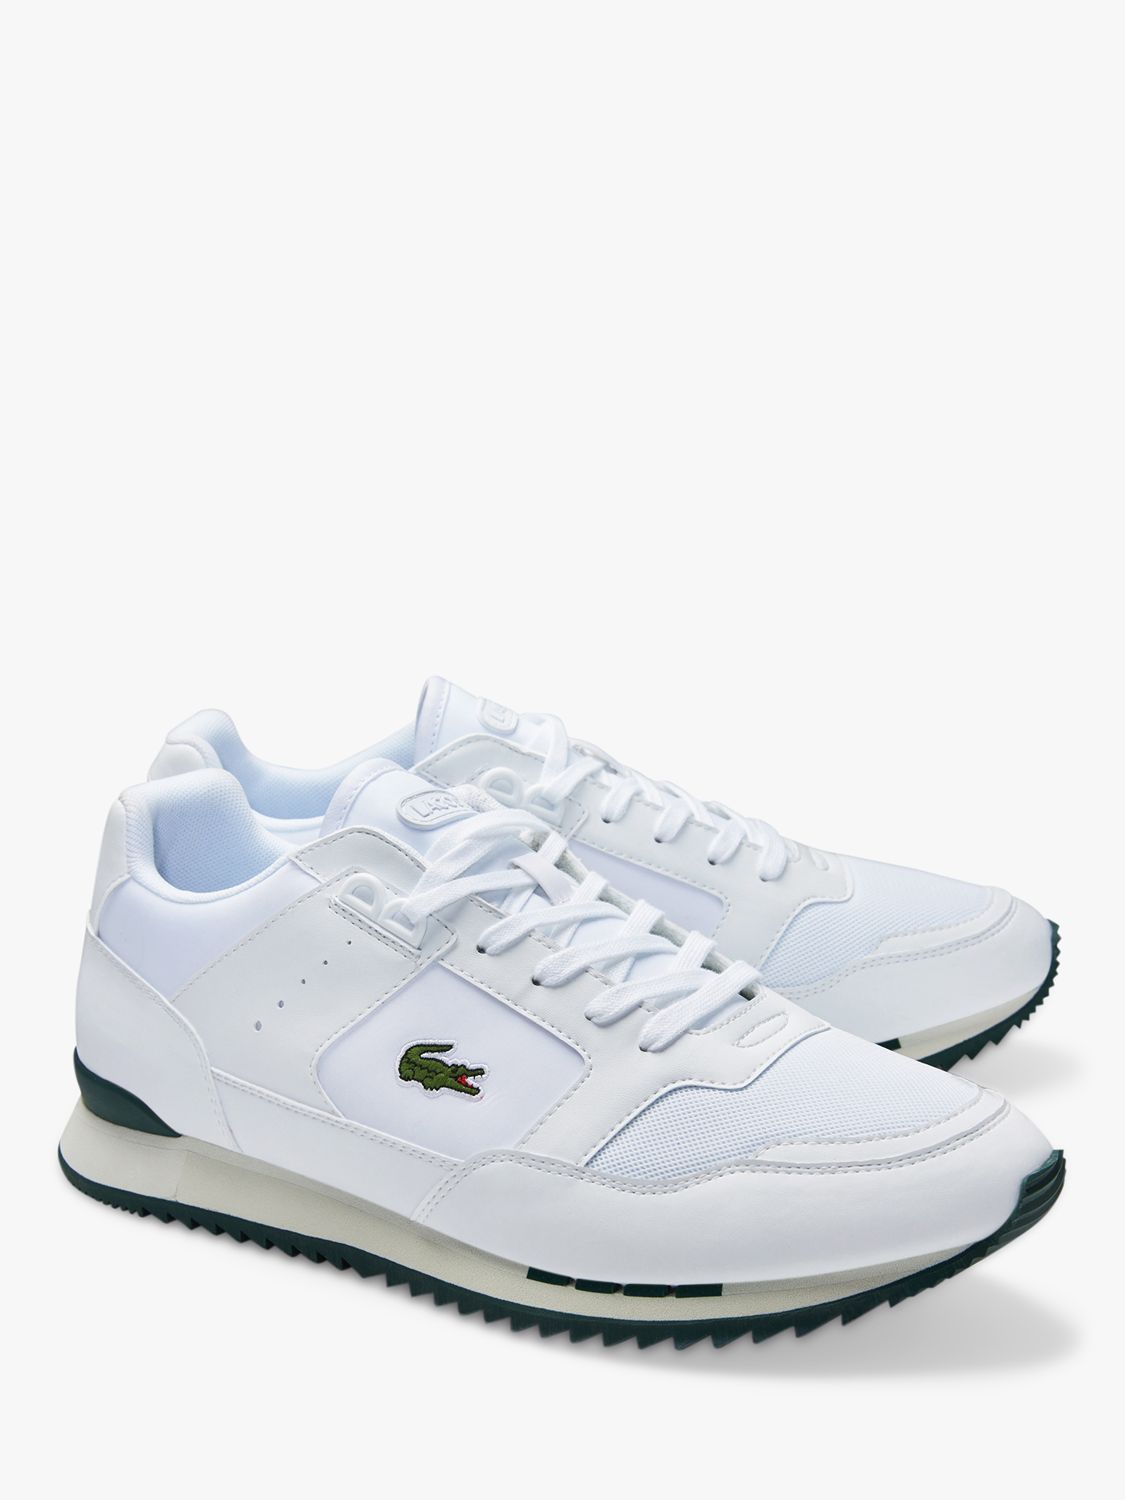 lacoste shoes white and green